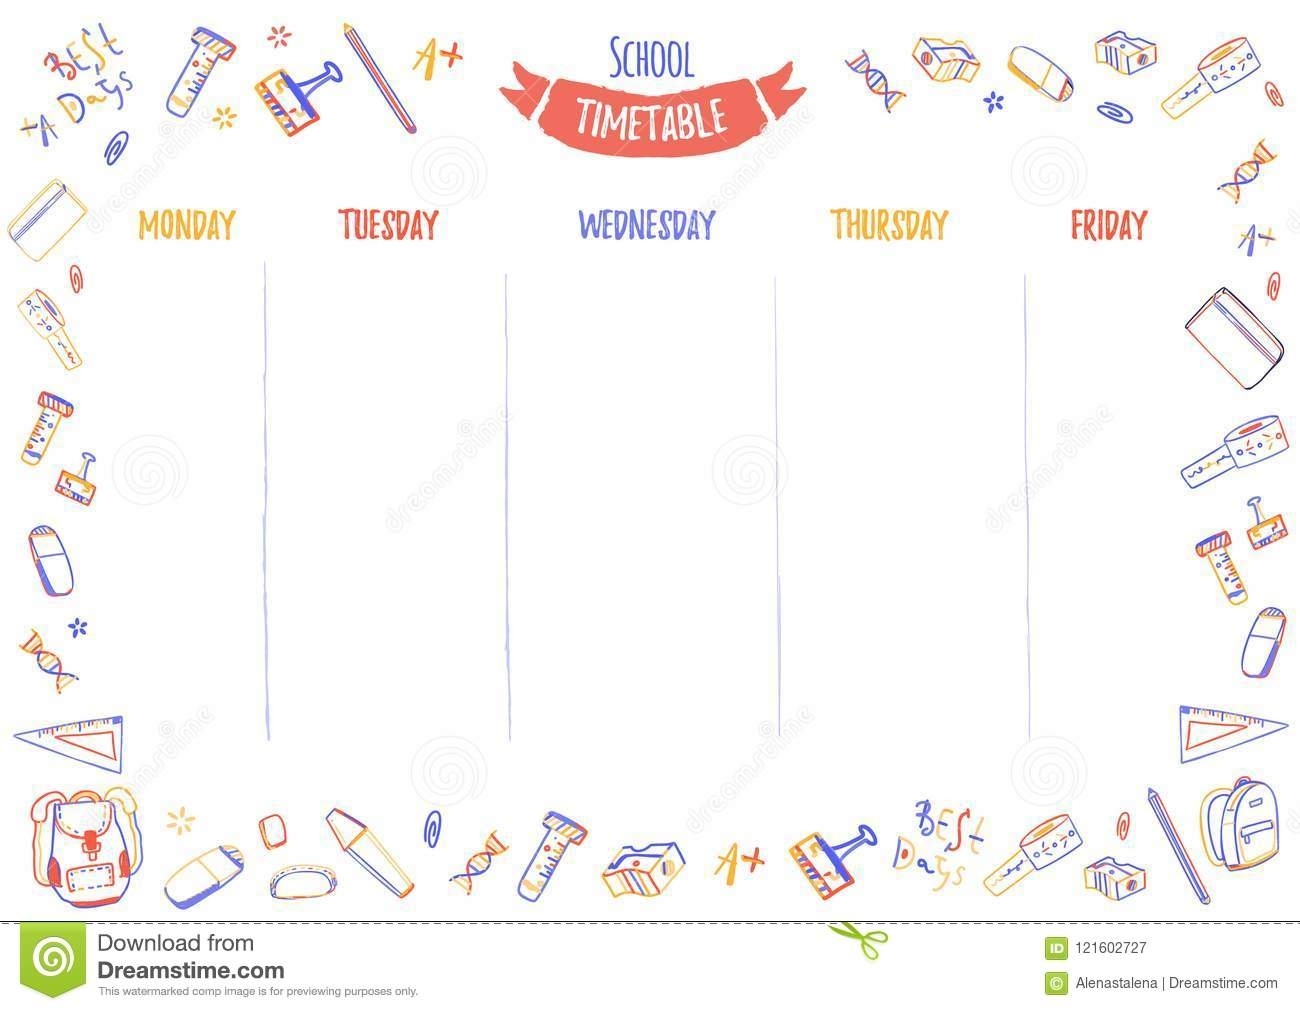 Collect 5 Day School Timetable